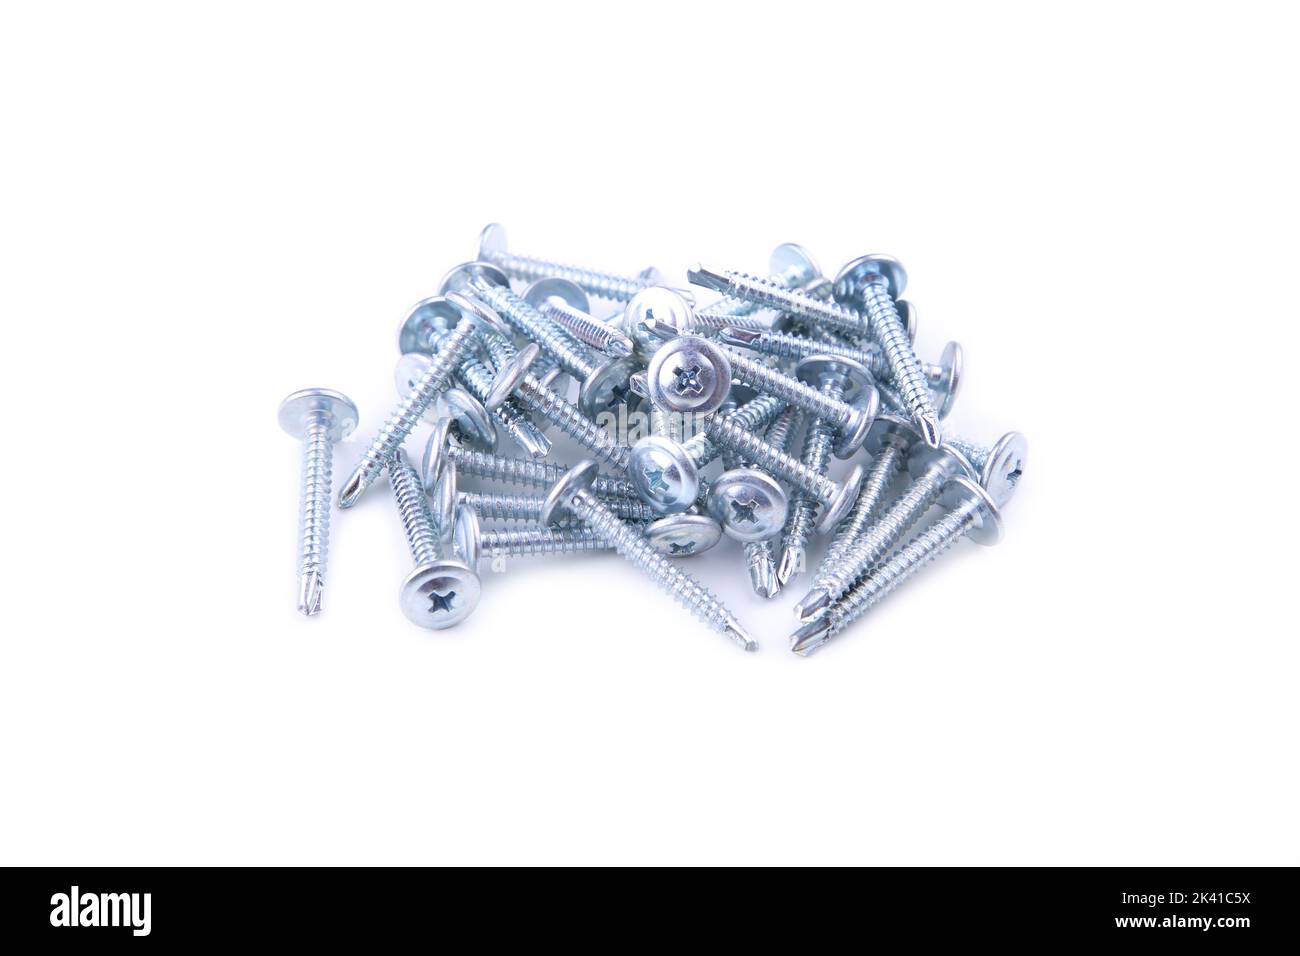 Screws still life large self tapping screws on white background Stock Photo